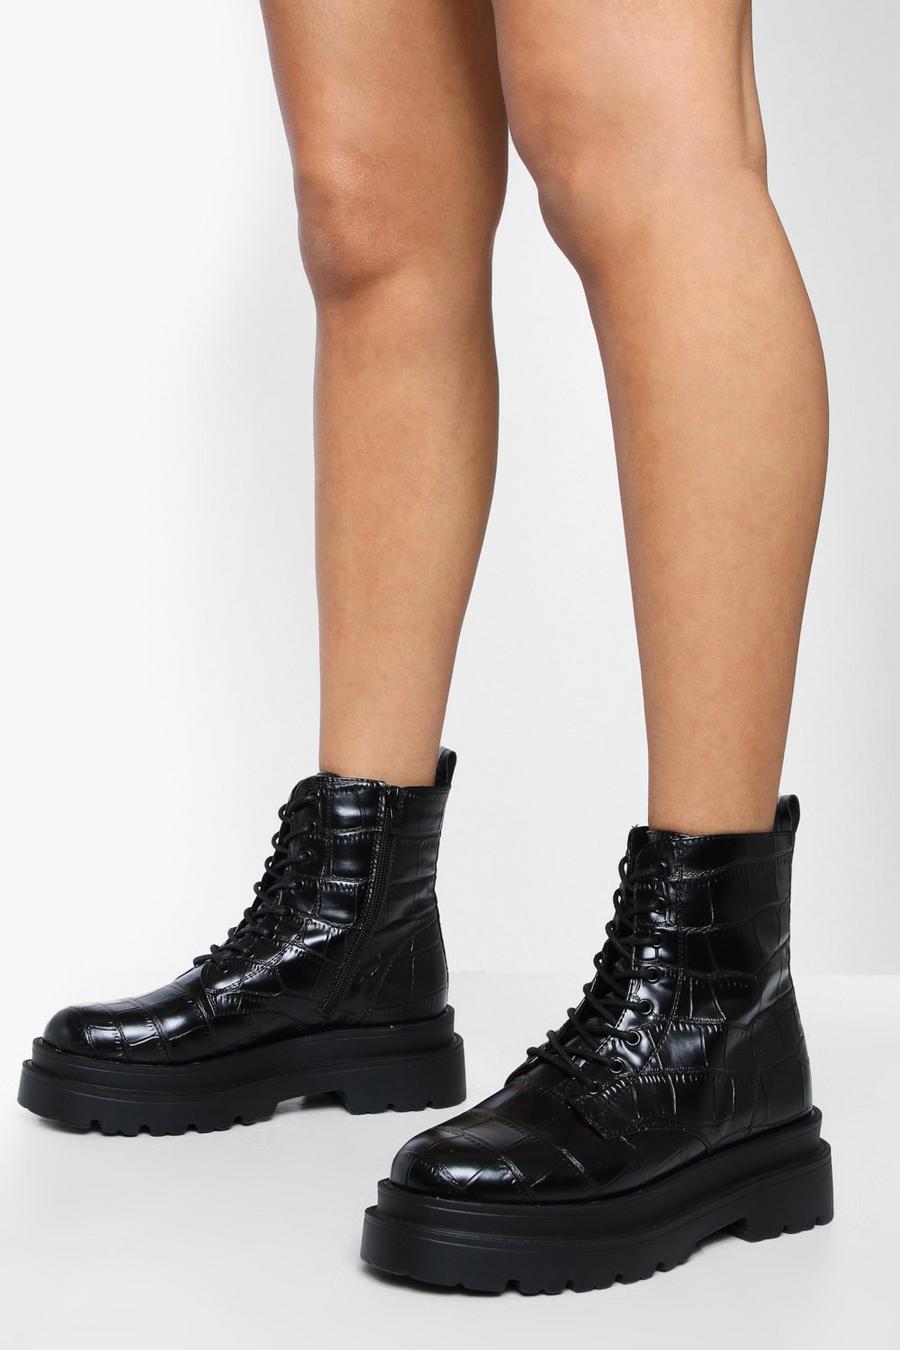 Black Croc Chunky Combat Boots image number 1